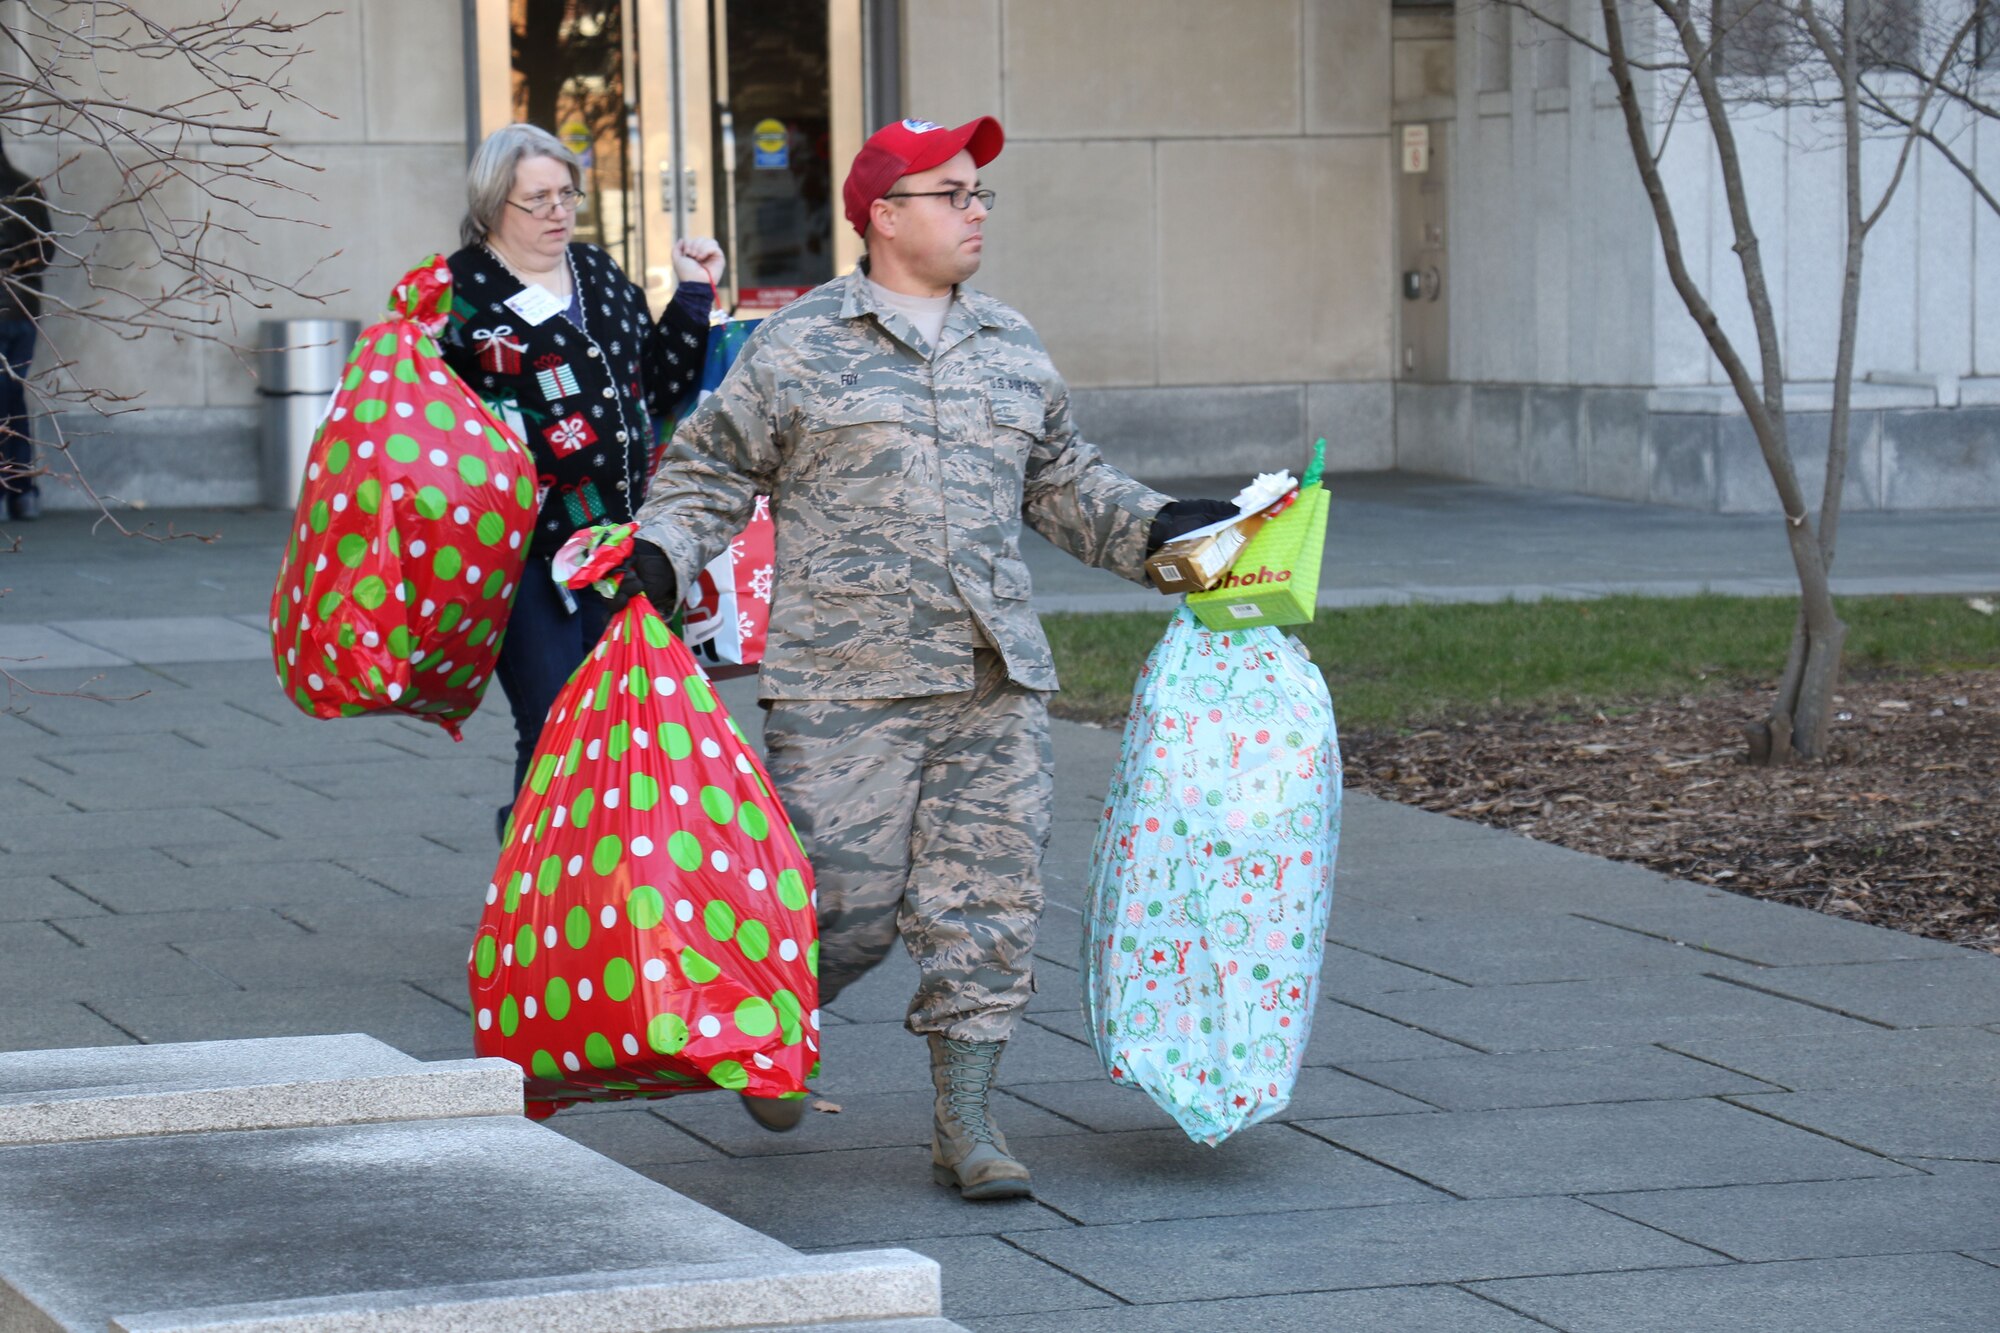 As part of the 28th annual Holiday Wish Program, Tech. Sgt Kevin Foy, 201st RED HORSE Squadron, along with other Pennsylvania Guardsmen and with the help of volunteer state employees, load donated gifts into military vehicles at the Keystone Building, Harrisburg, Pennsylvania, Dec. 6, 2017. The donated gifts were delivered to participating county assistance offices for distribution to families and individuals.  (U.S. Air National Guard photo by Master Sgt. Culeen Shaffer/Released)